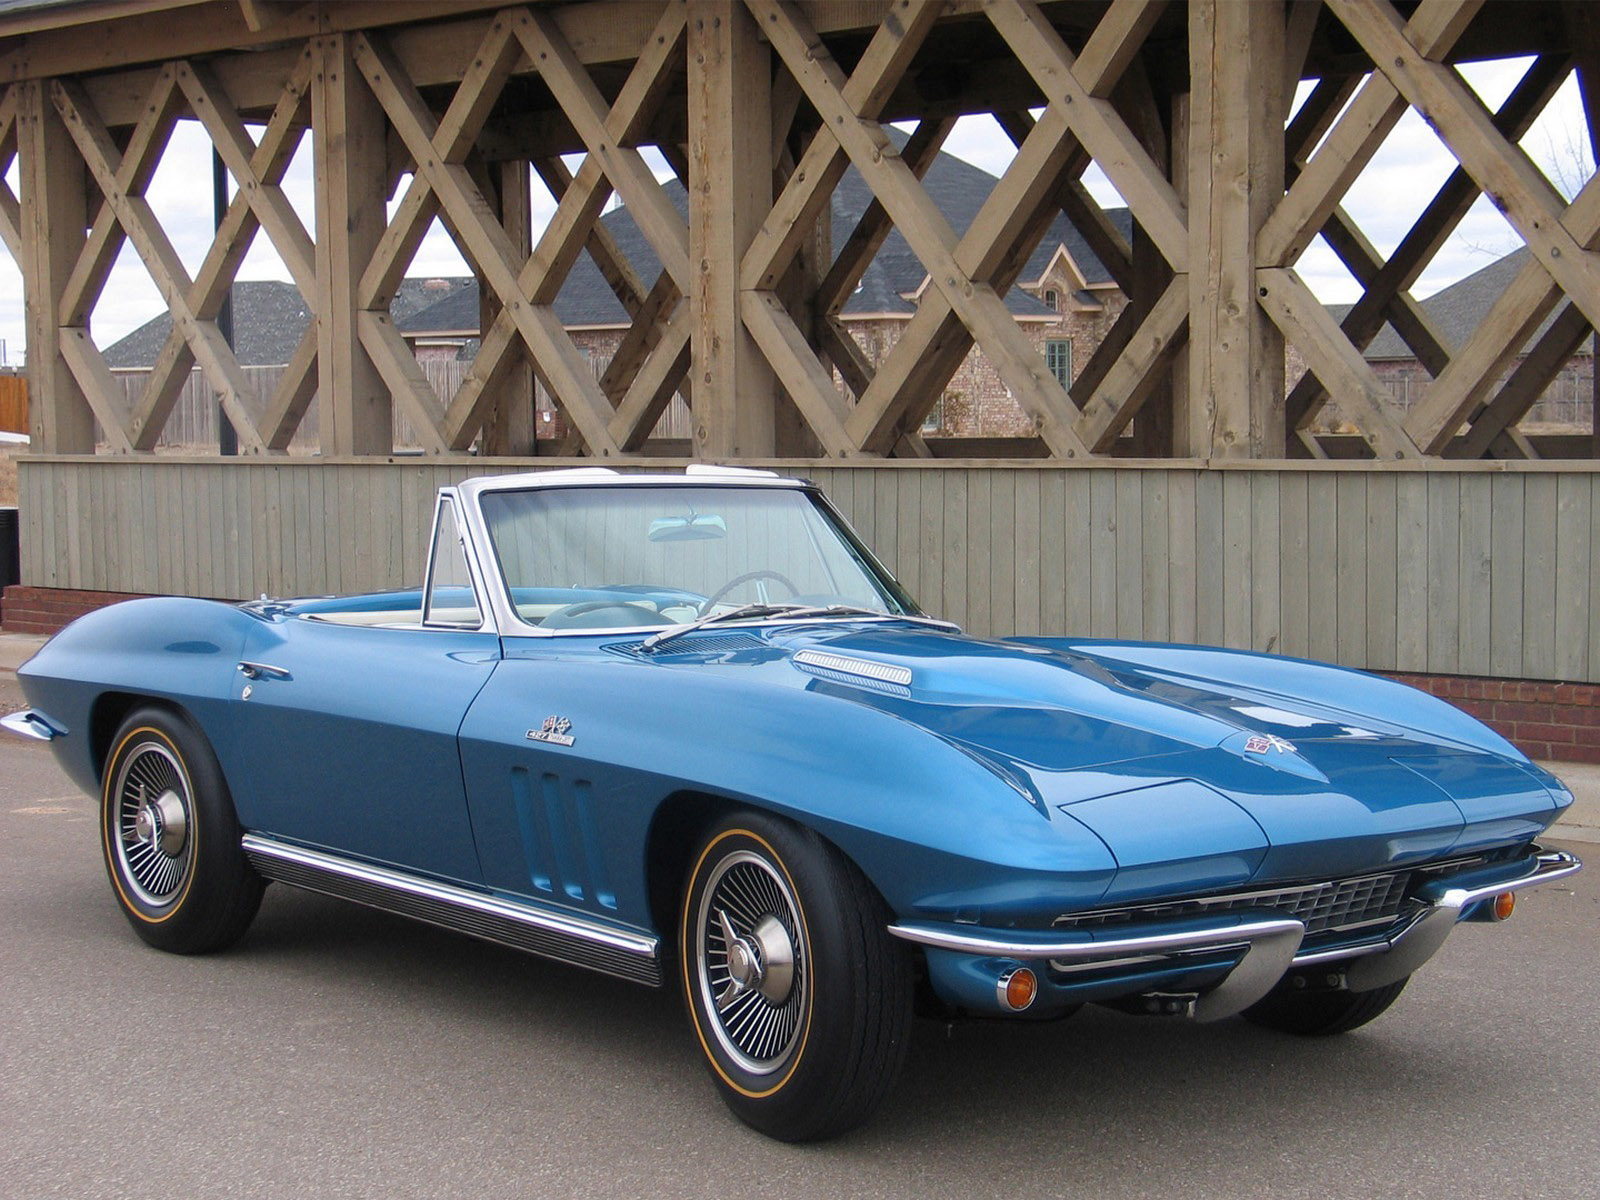 1965, Chevrolet, Corvette, C2, Sting, Ray, Convertible, Classic, Muscle, Supercar, Supercars Wallpaper